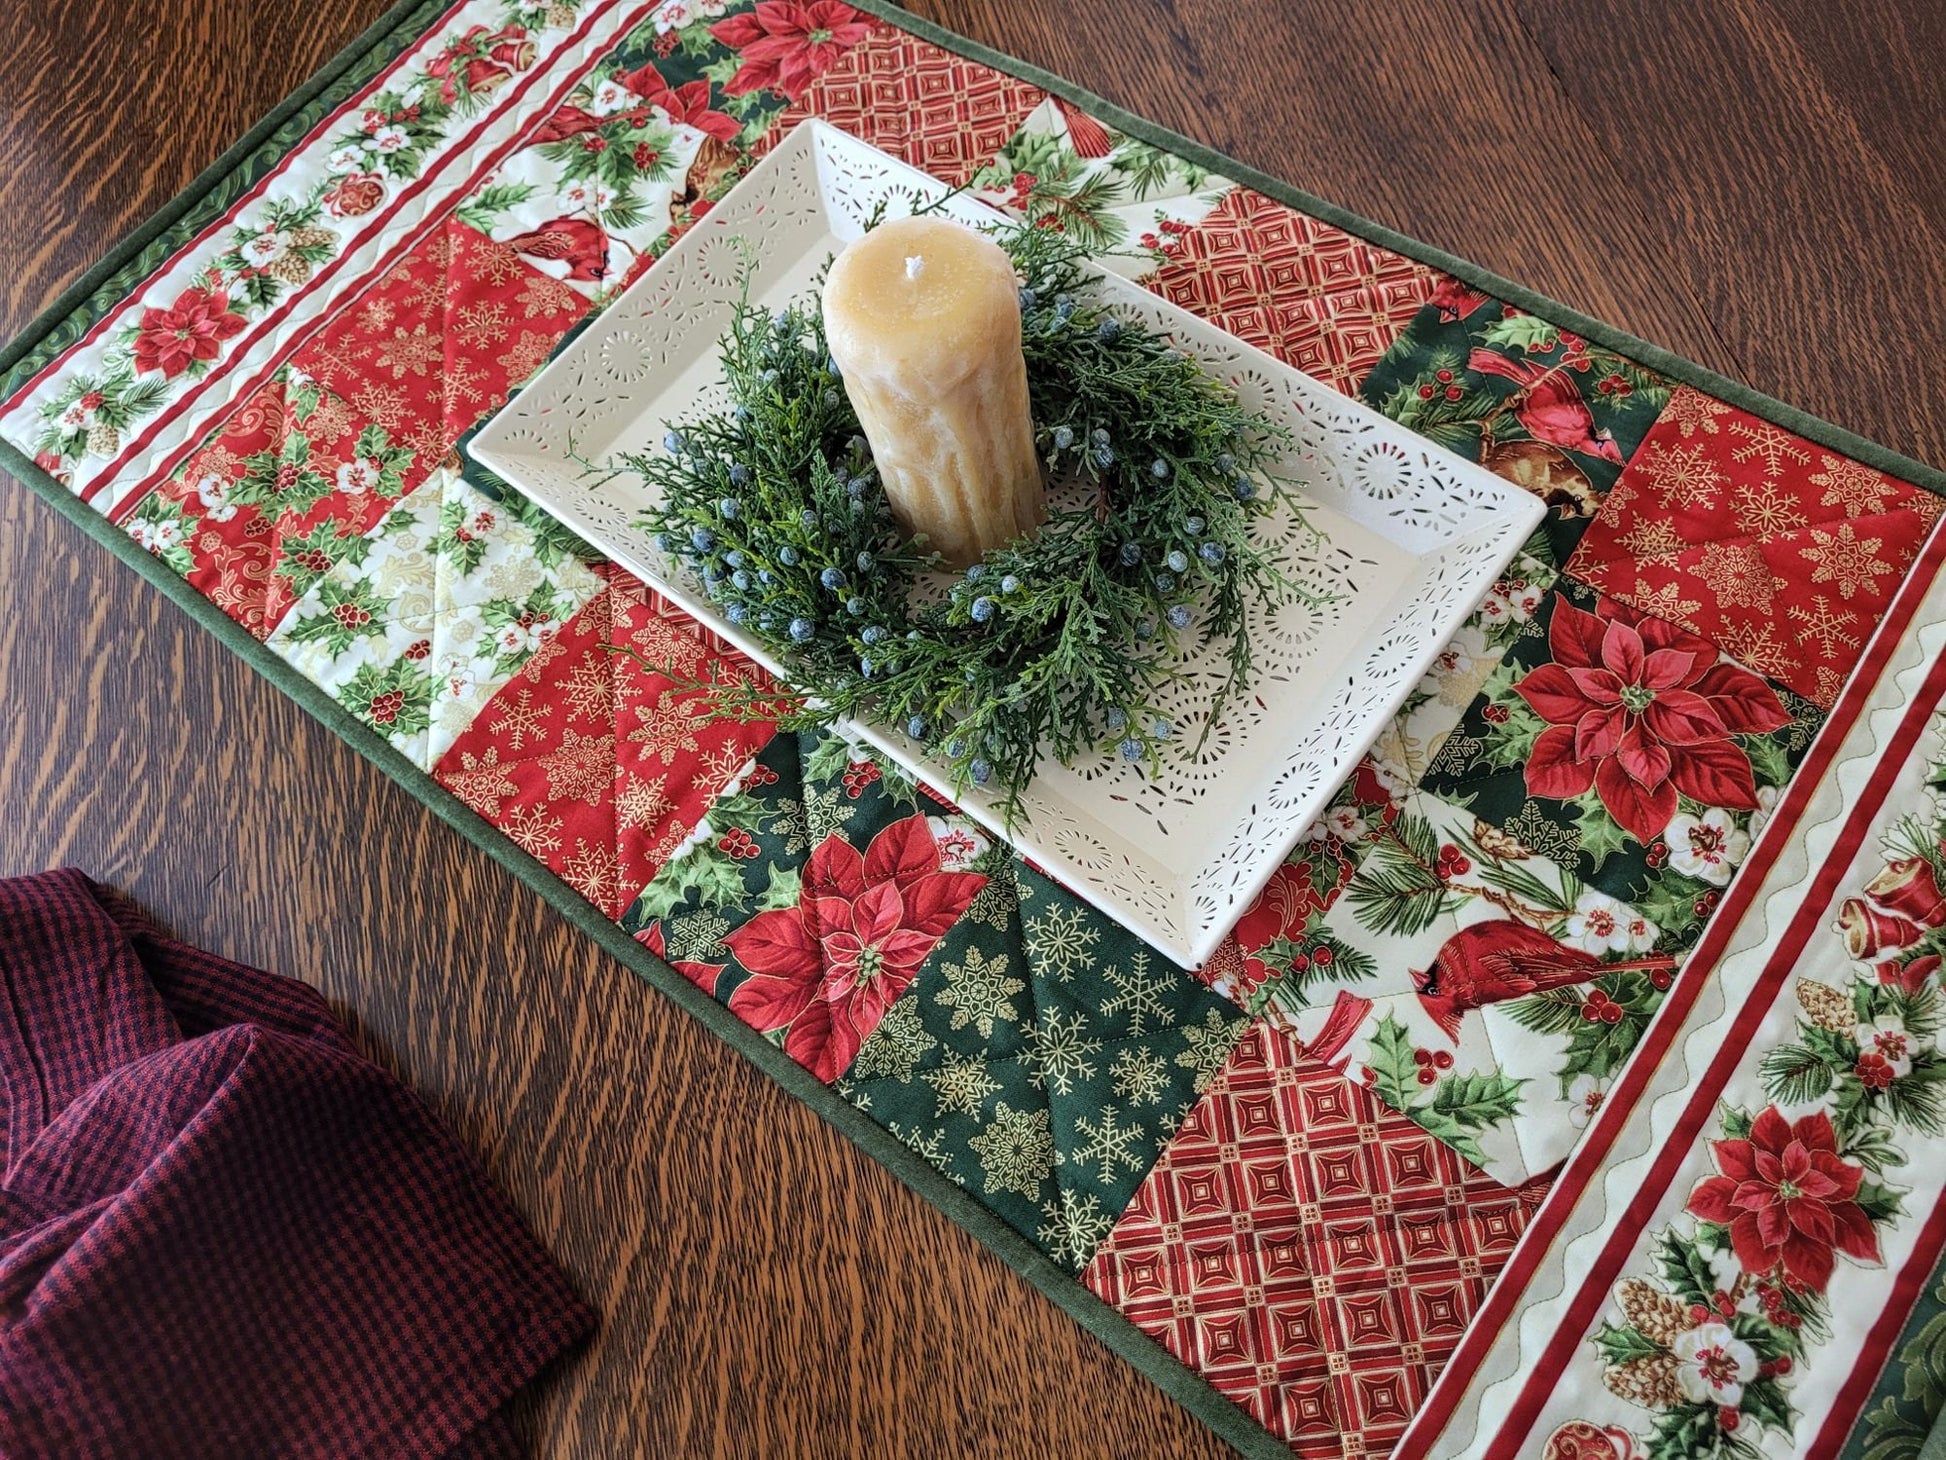 holiday table runner with poinsettias and cardinals